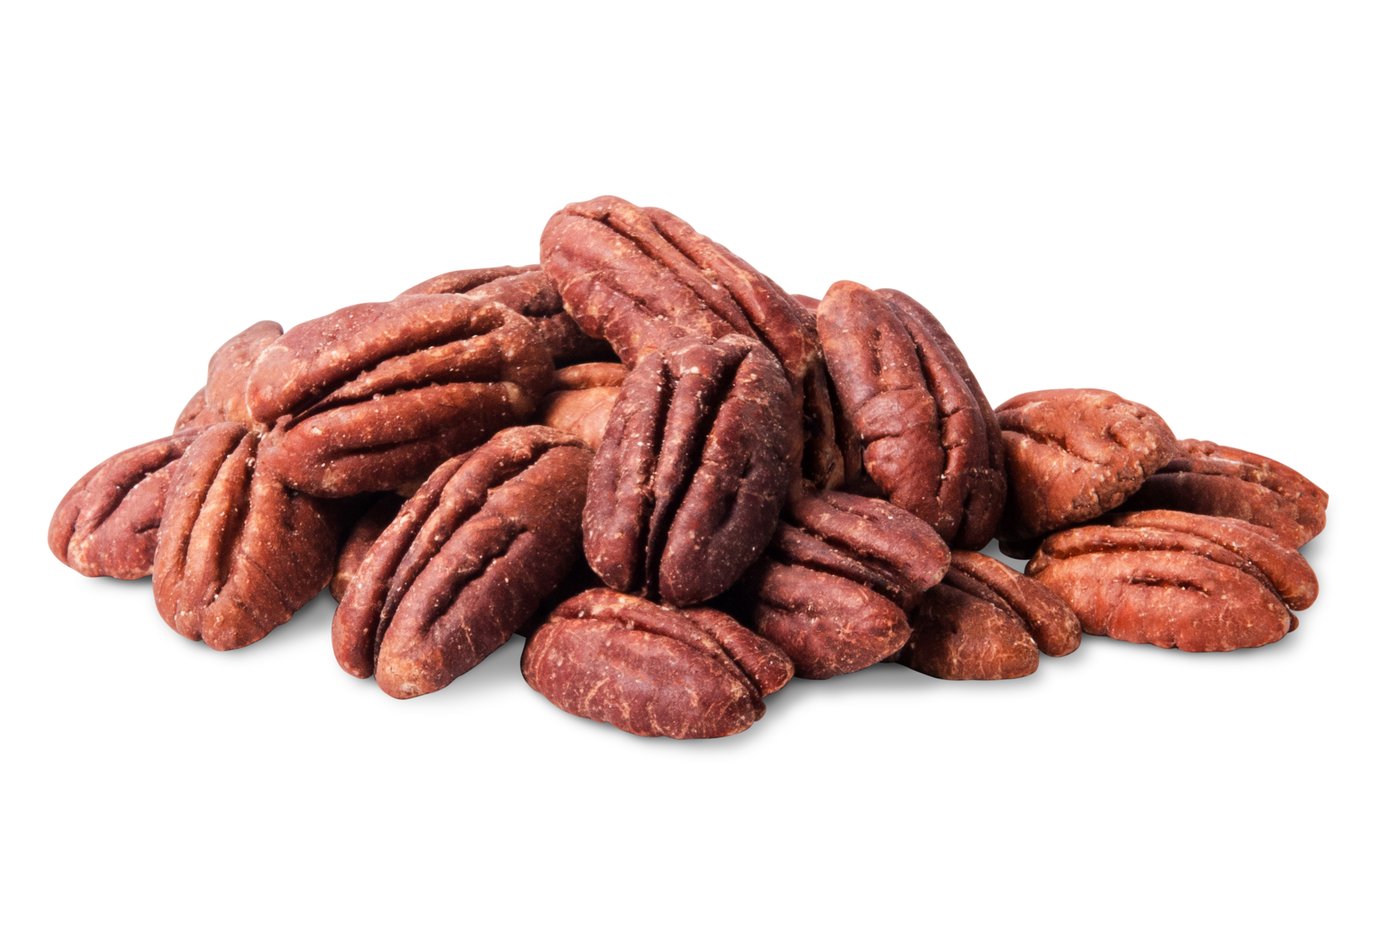 Organic Dry Roasted Pecans (Unsalted) image zoom